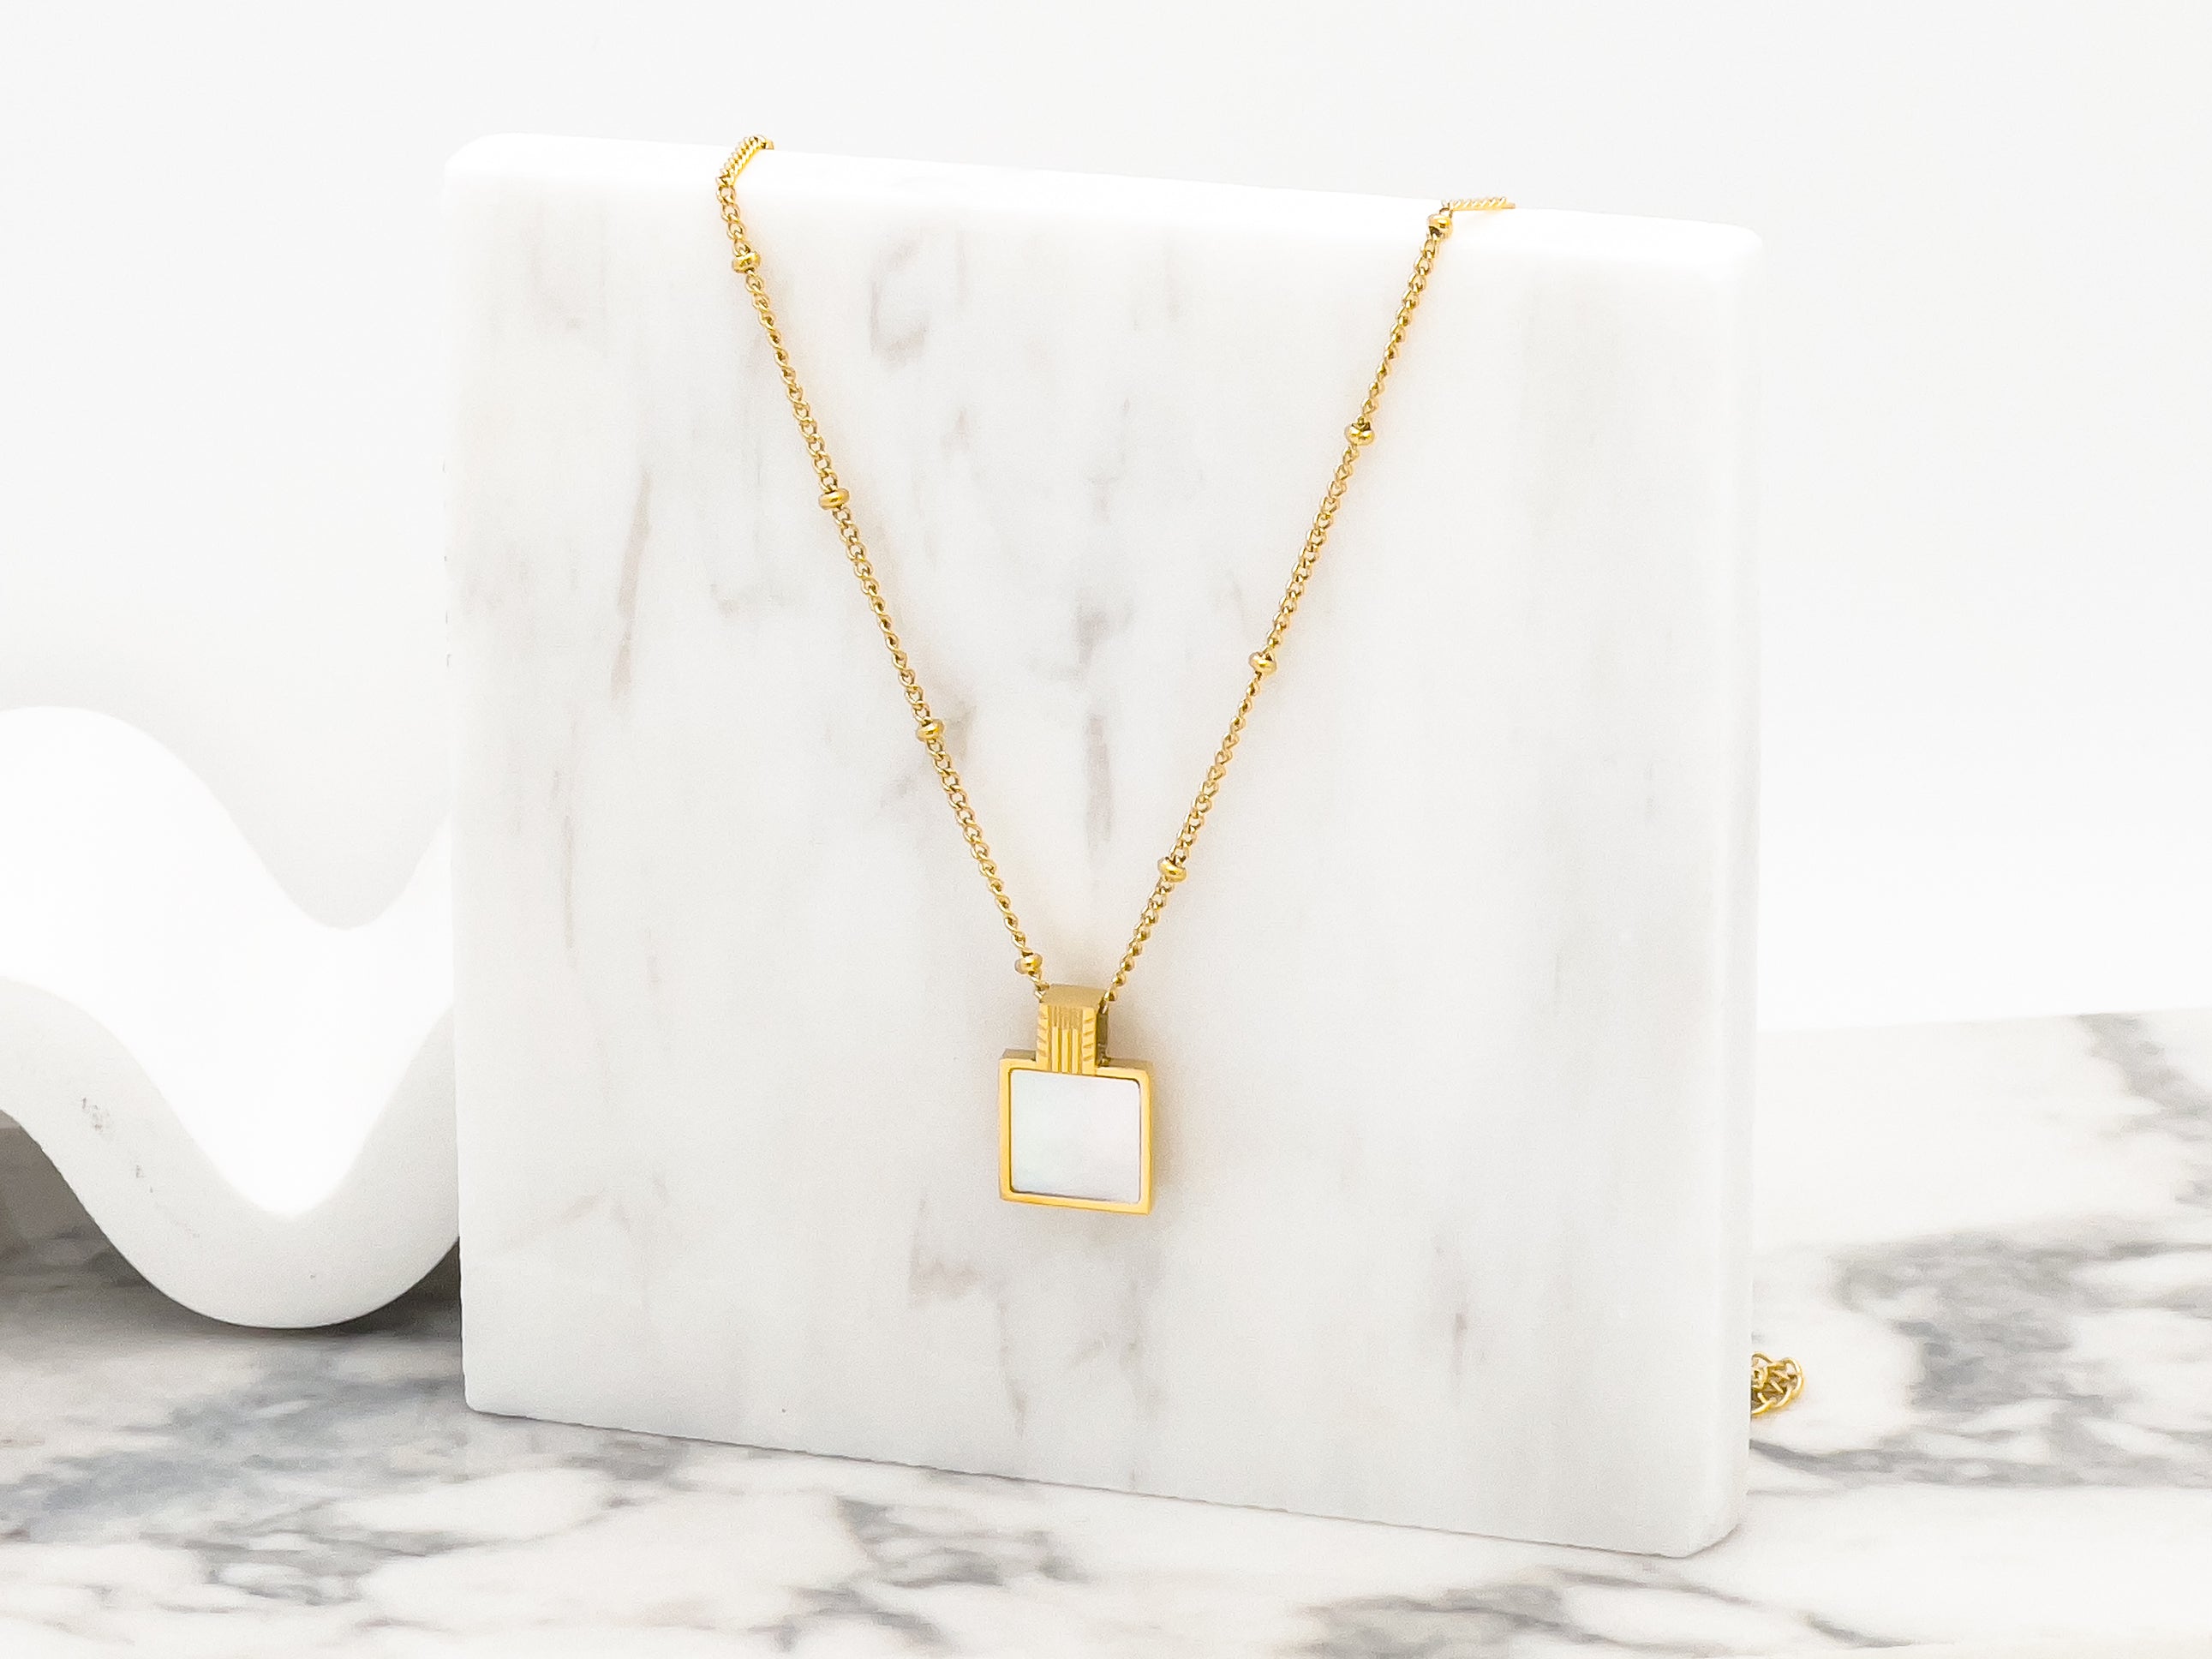 Lily Square Shell Pendant Necklace - Everyday Jewelry | chic chic bon